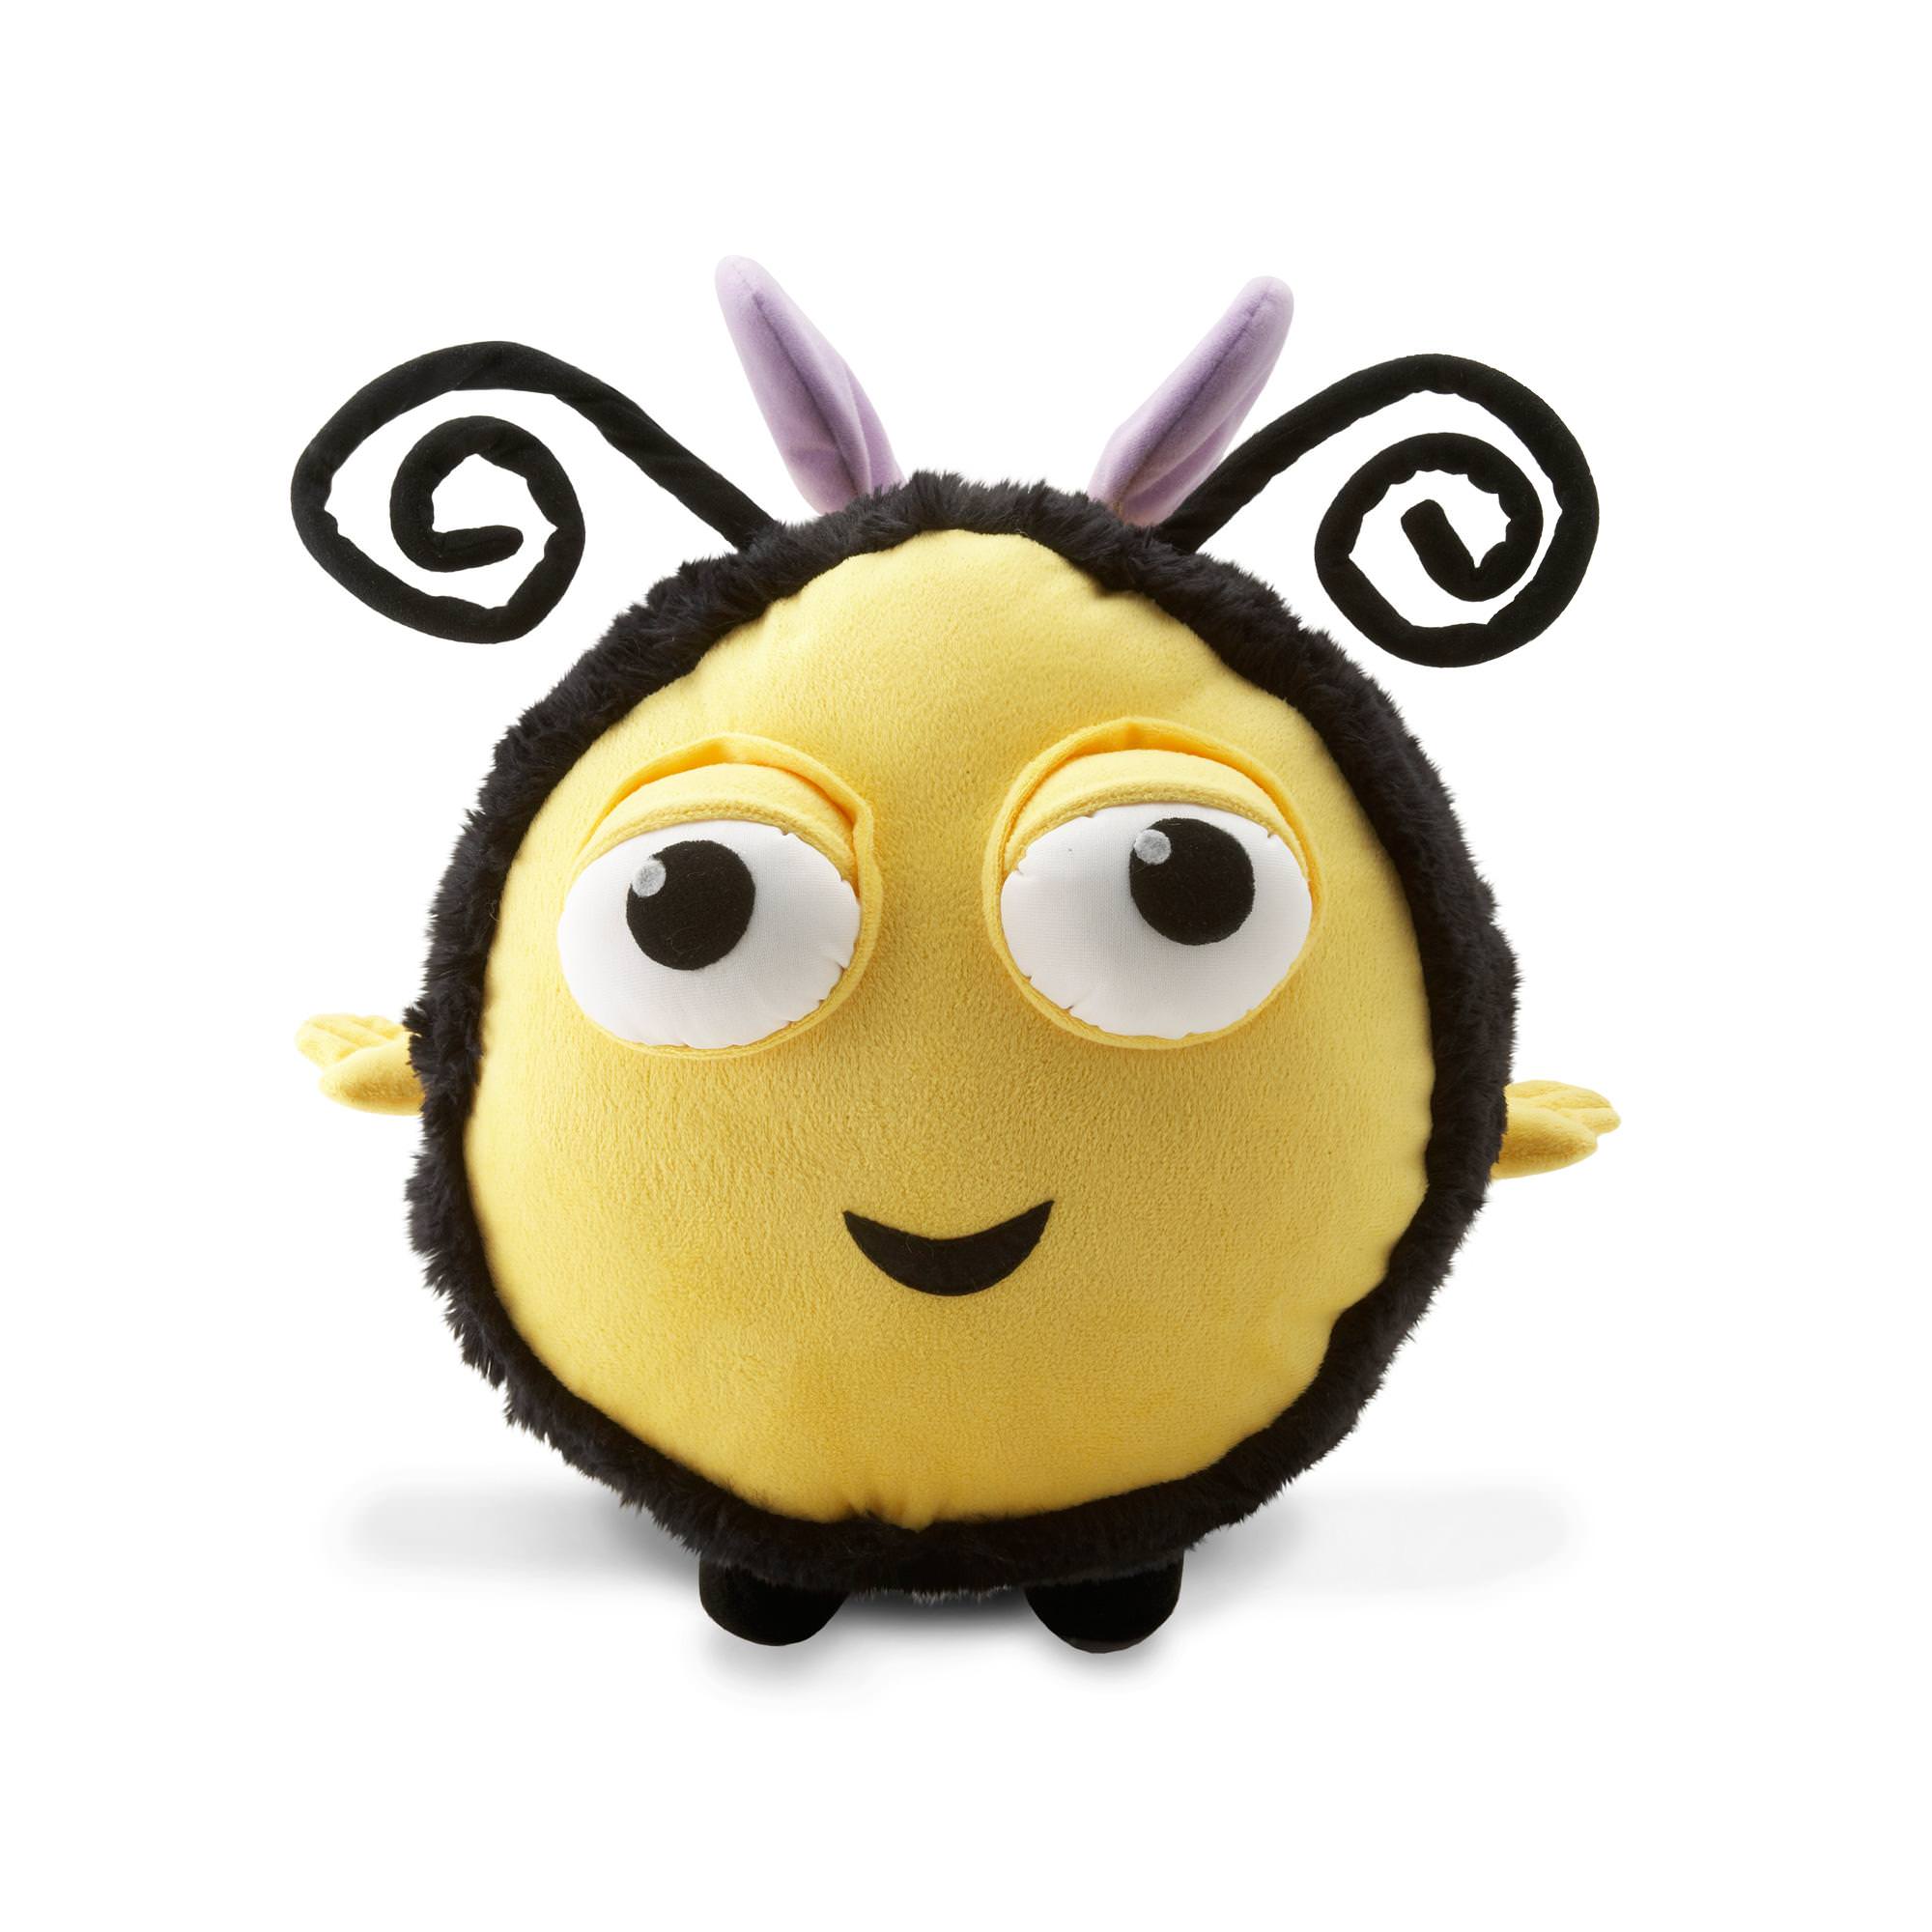 The Hive Buzz Bee Toys.Us Best Wallpaper 2018